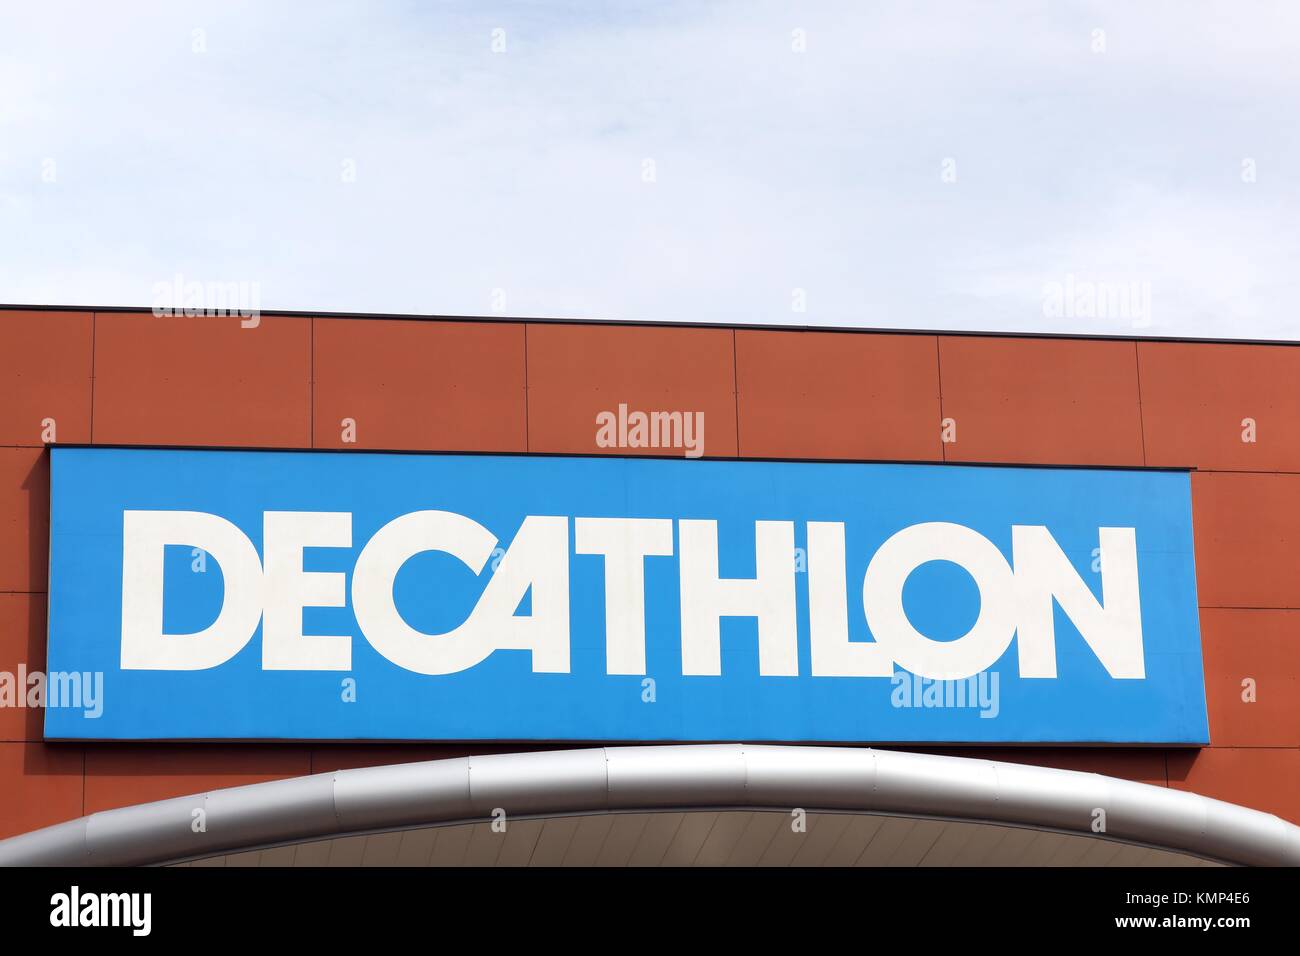 Bourgoin, France - June 26, 2017: Decathlon sign on a wall.Decathlon is a french company and one of the world's largest sporting goods retailers Stock Photo